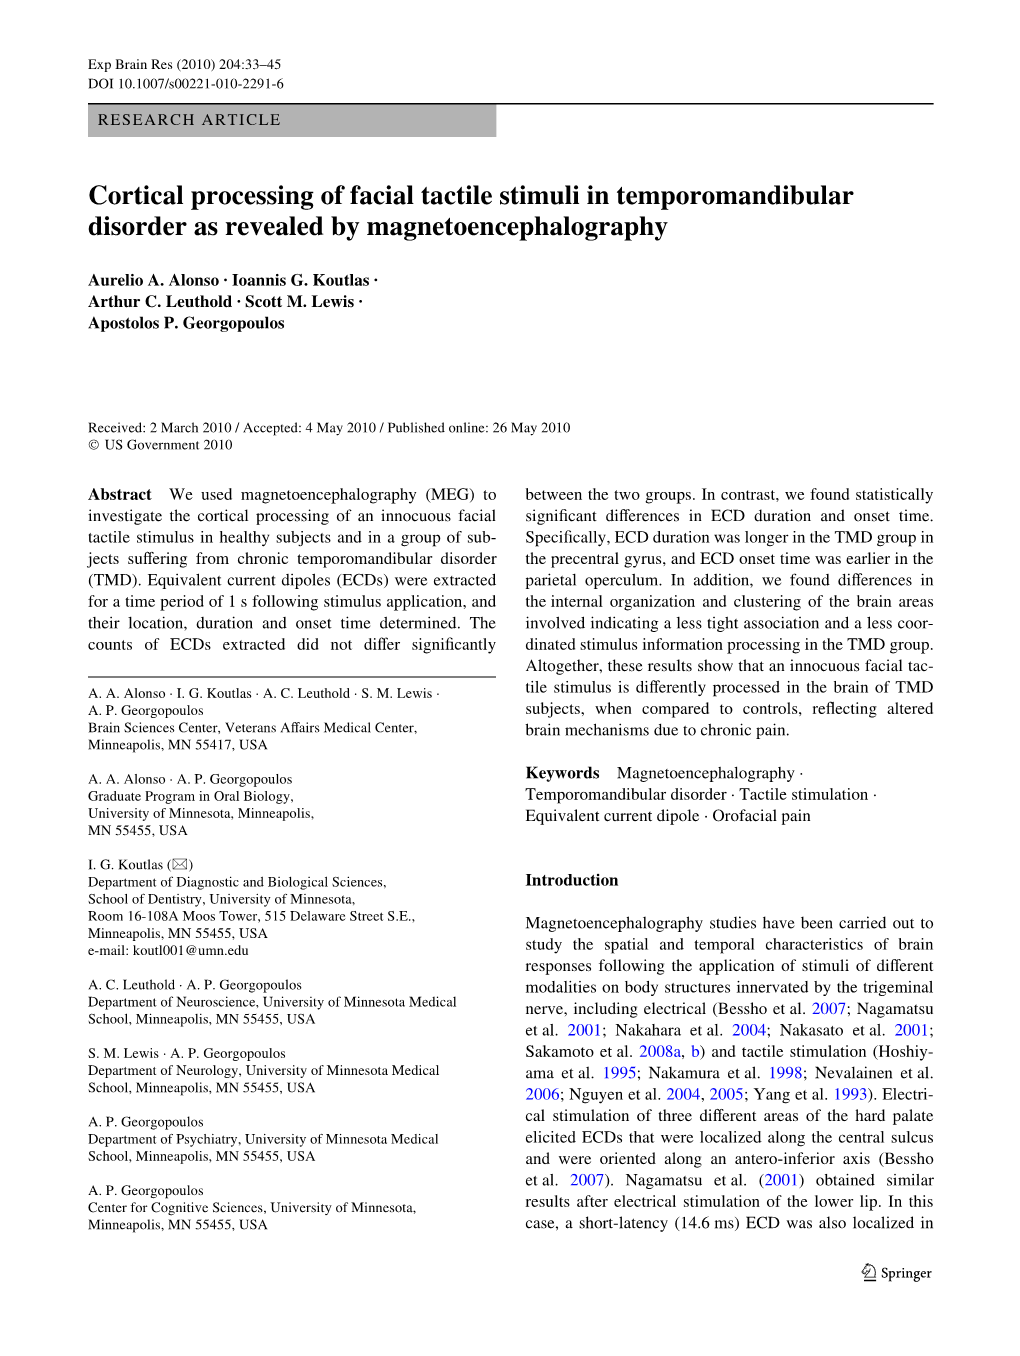 Cortical Processing of Facial Tactile Stimuli in Temporomandibular Disorder As Revealed by Magnetoencephalography